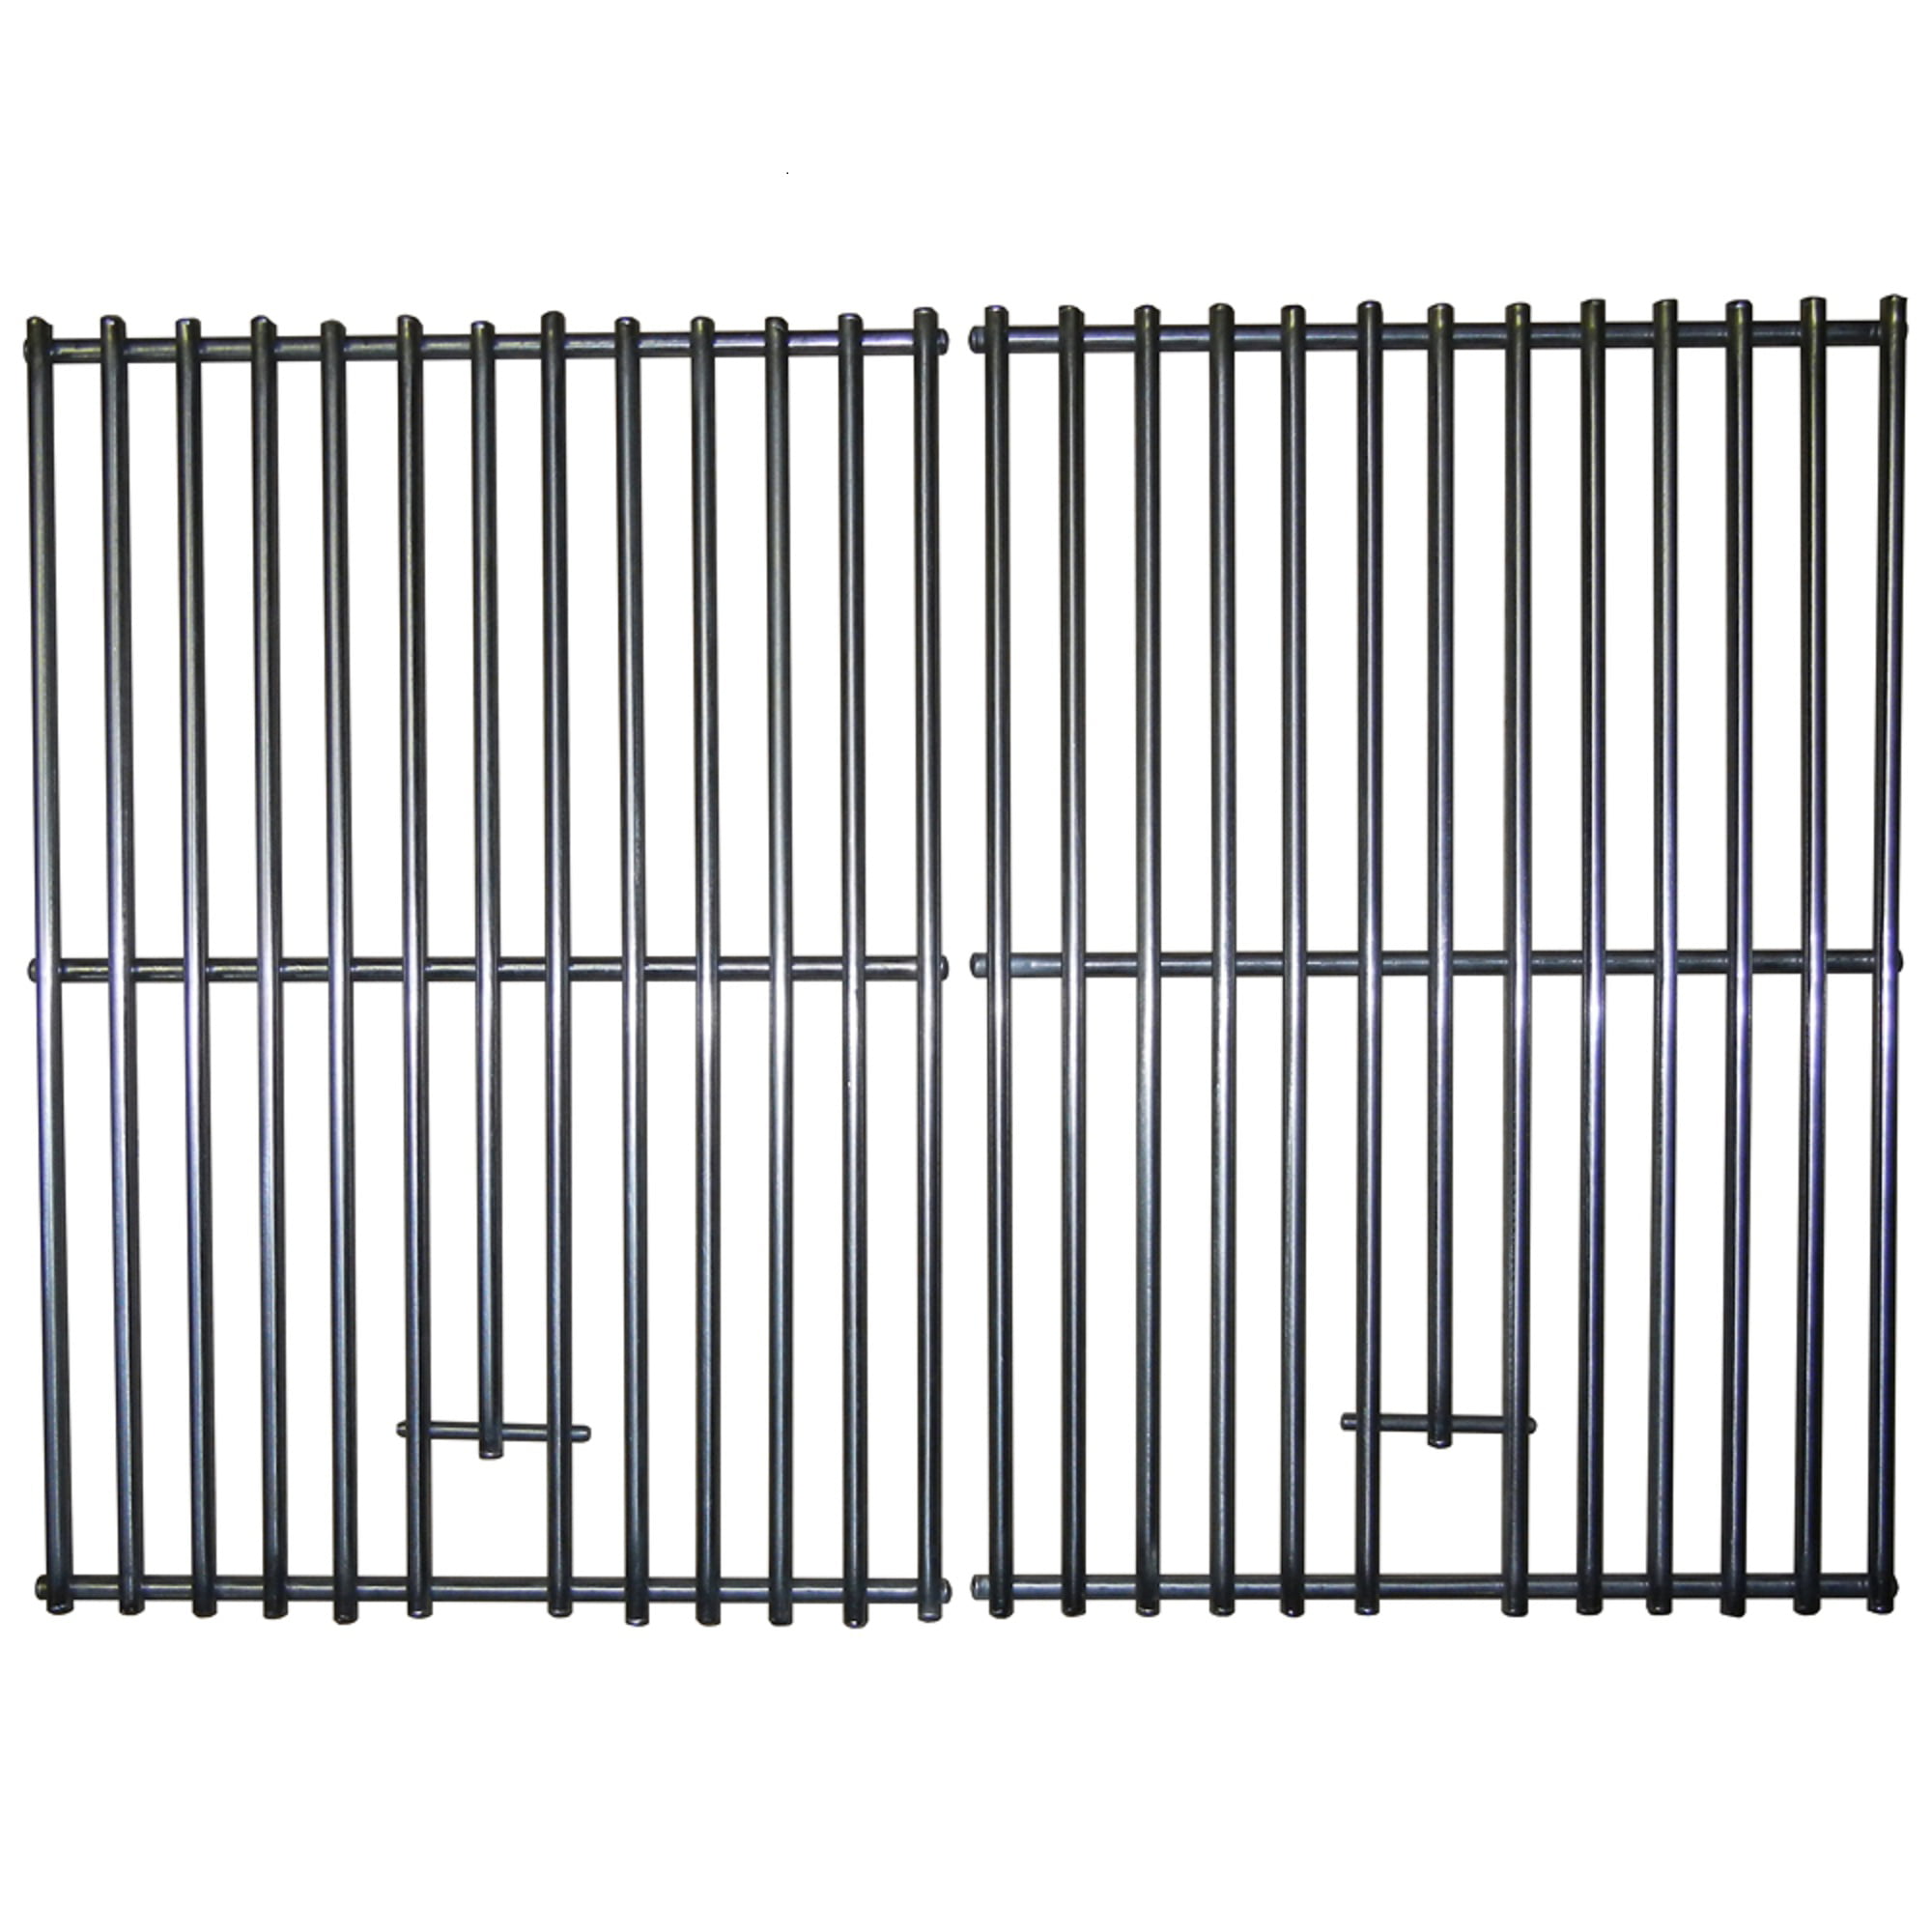 Stainless steel clad wire cooking grid for Kitchen Aid brand gas grills